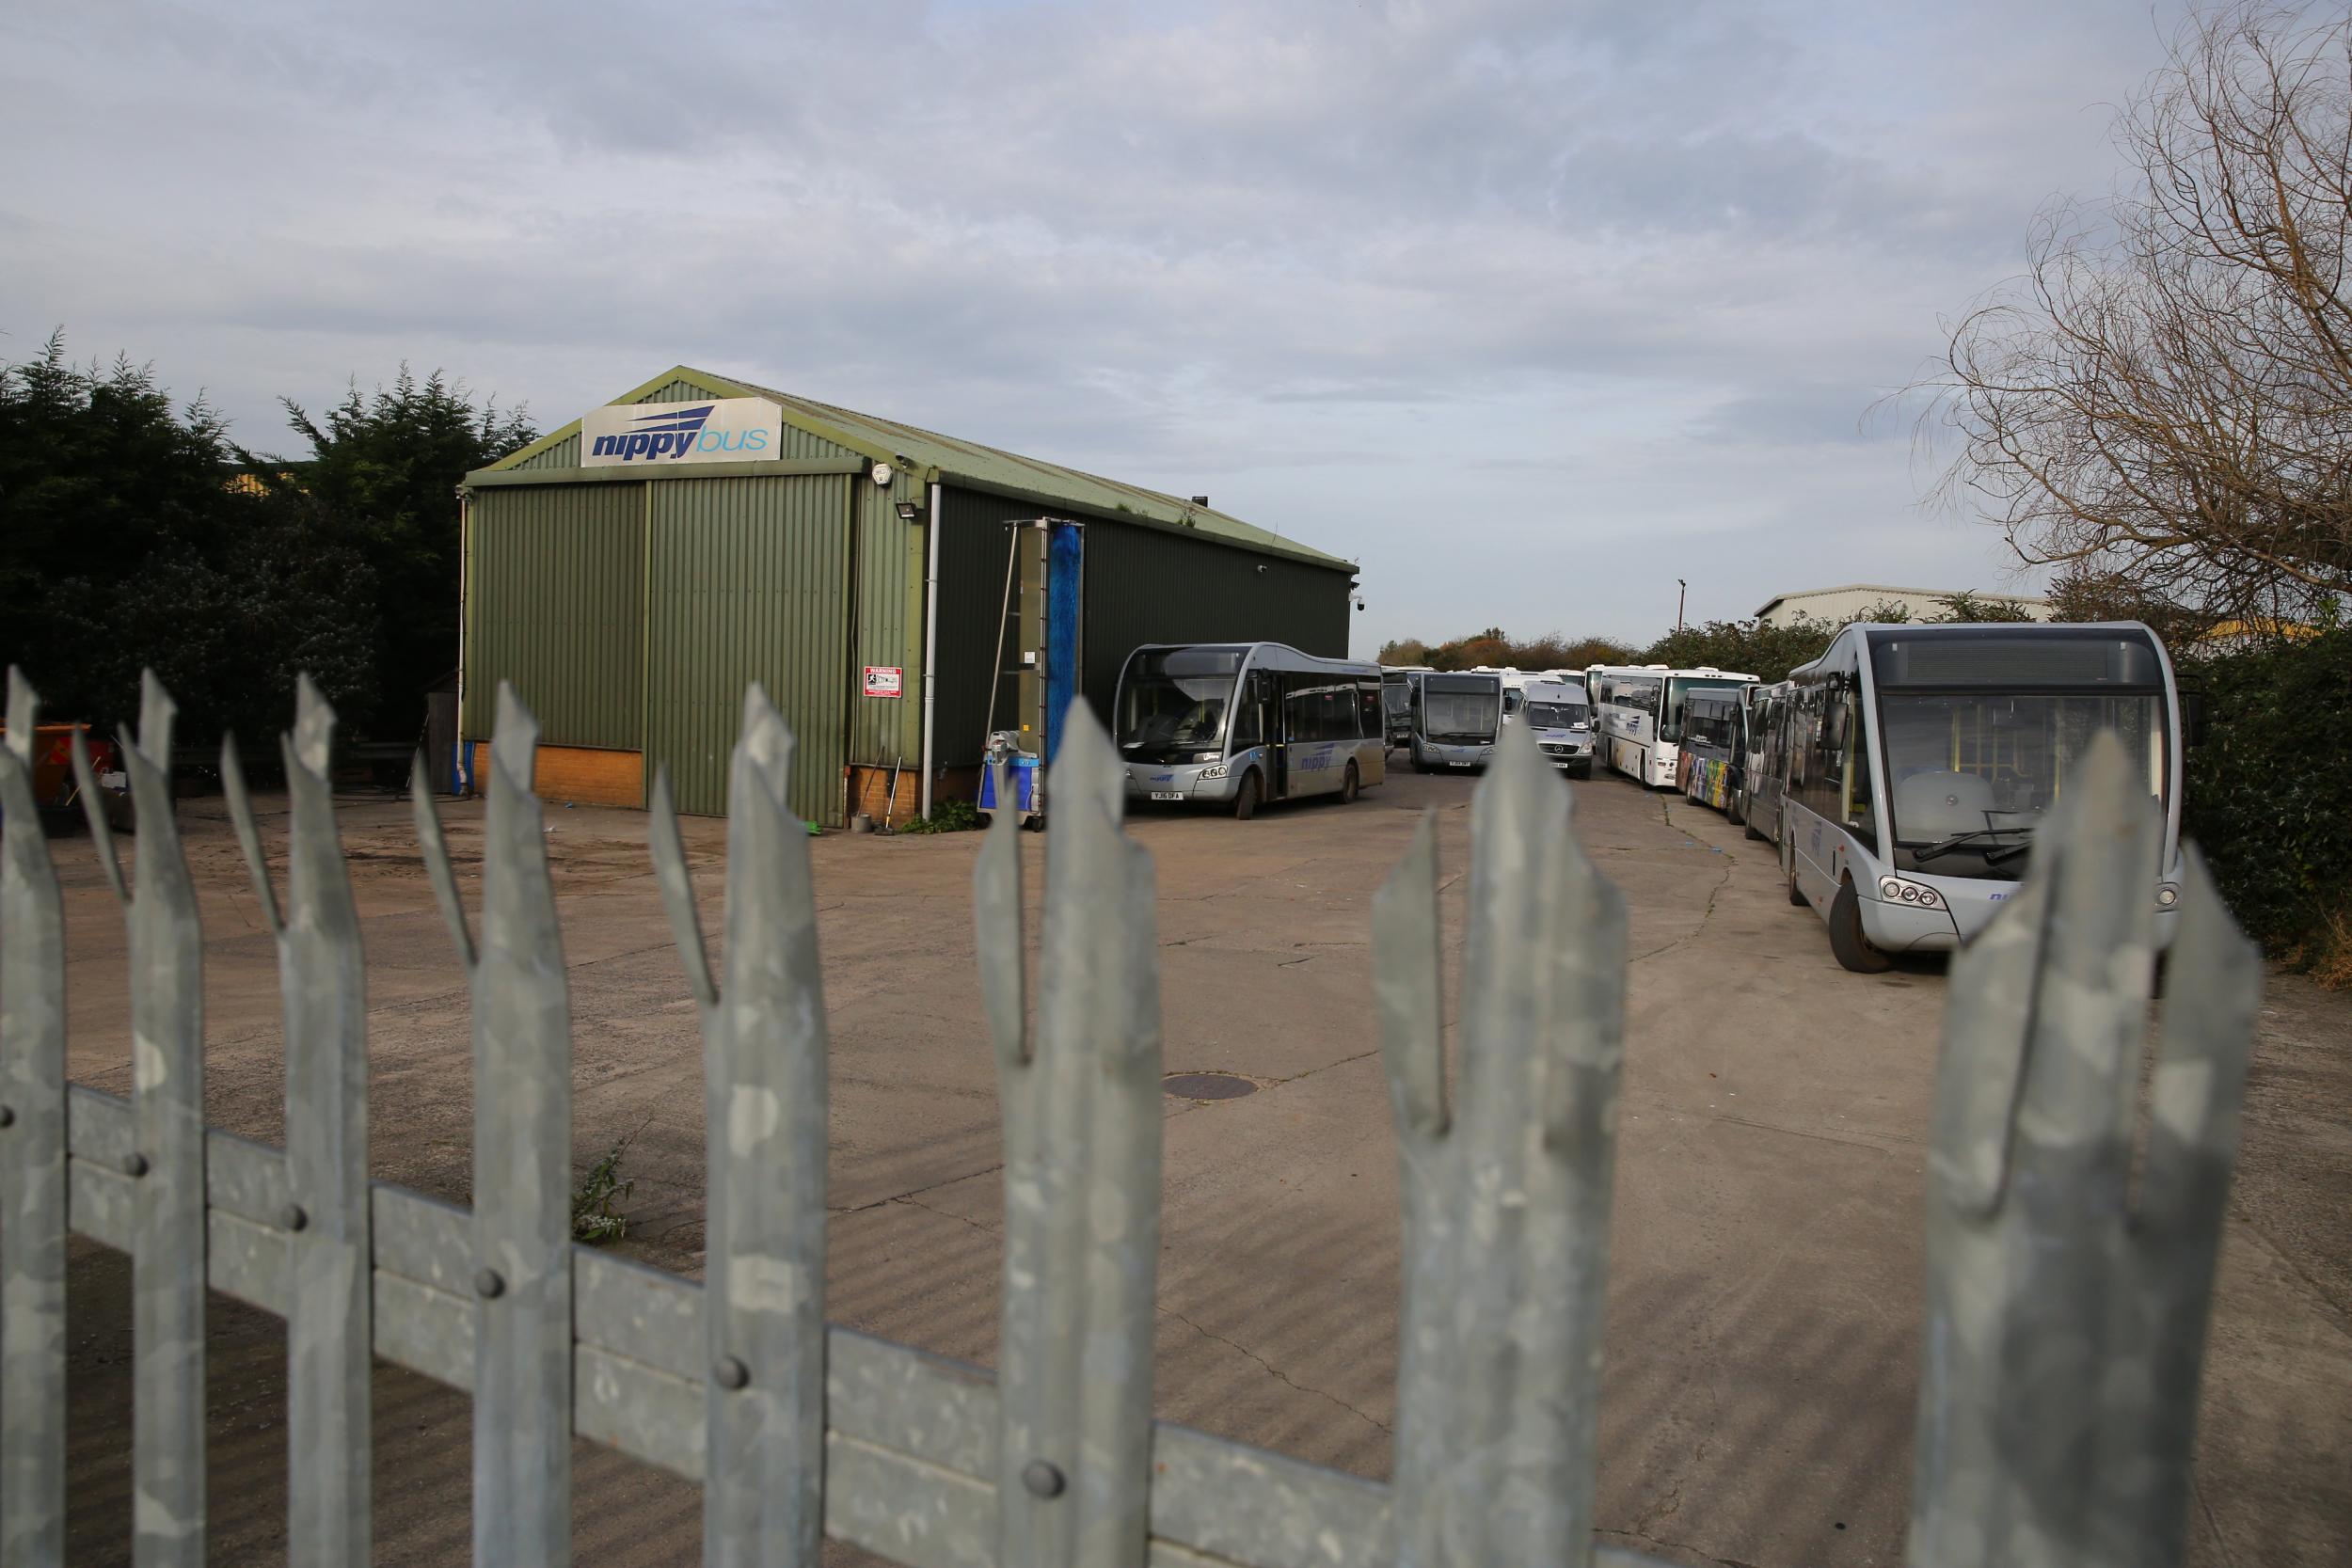 The closed Nippy Bus depot in Martock, Somerset